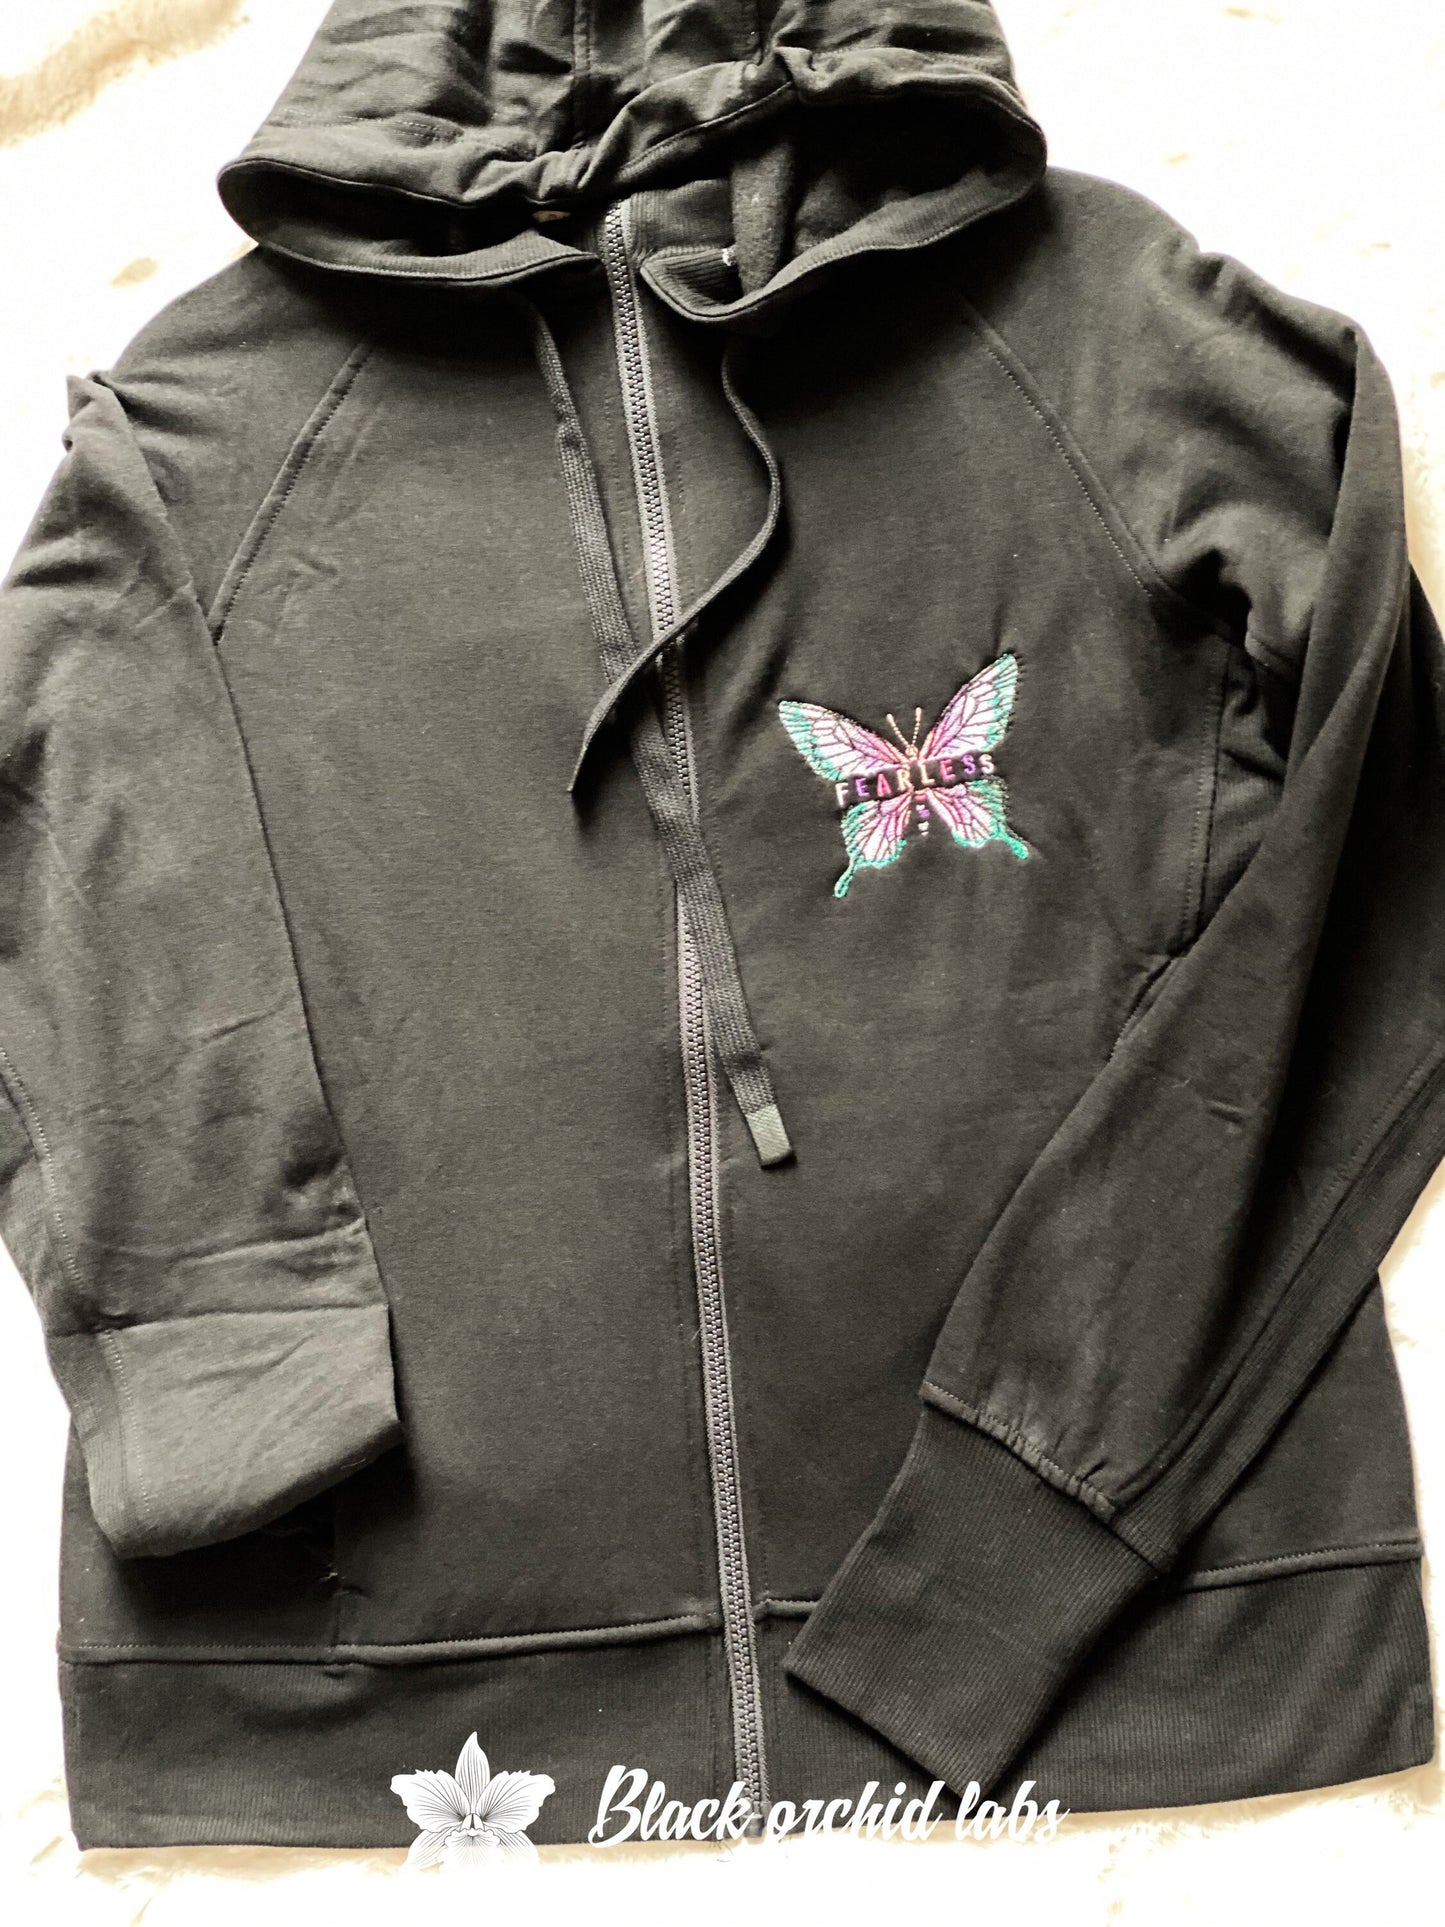 Fearless Butterfly Embroidered Hoodie Zip front or Pullover, Ultra Soft Hoodie, Strong Woman Gift